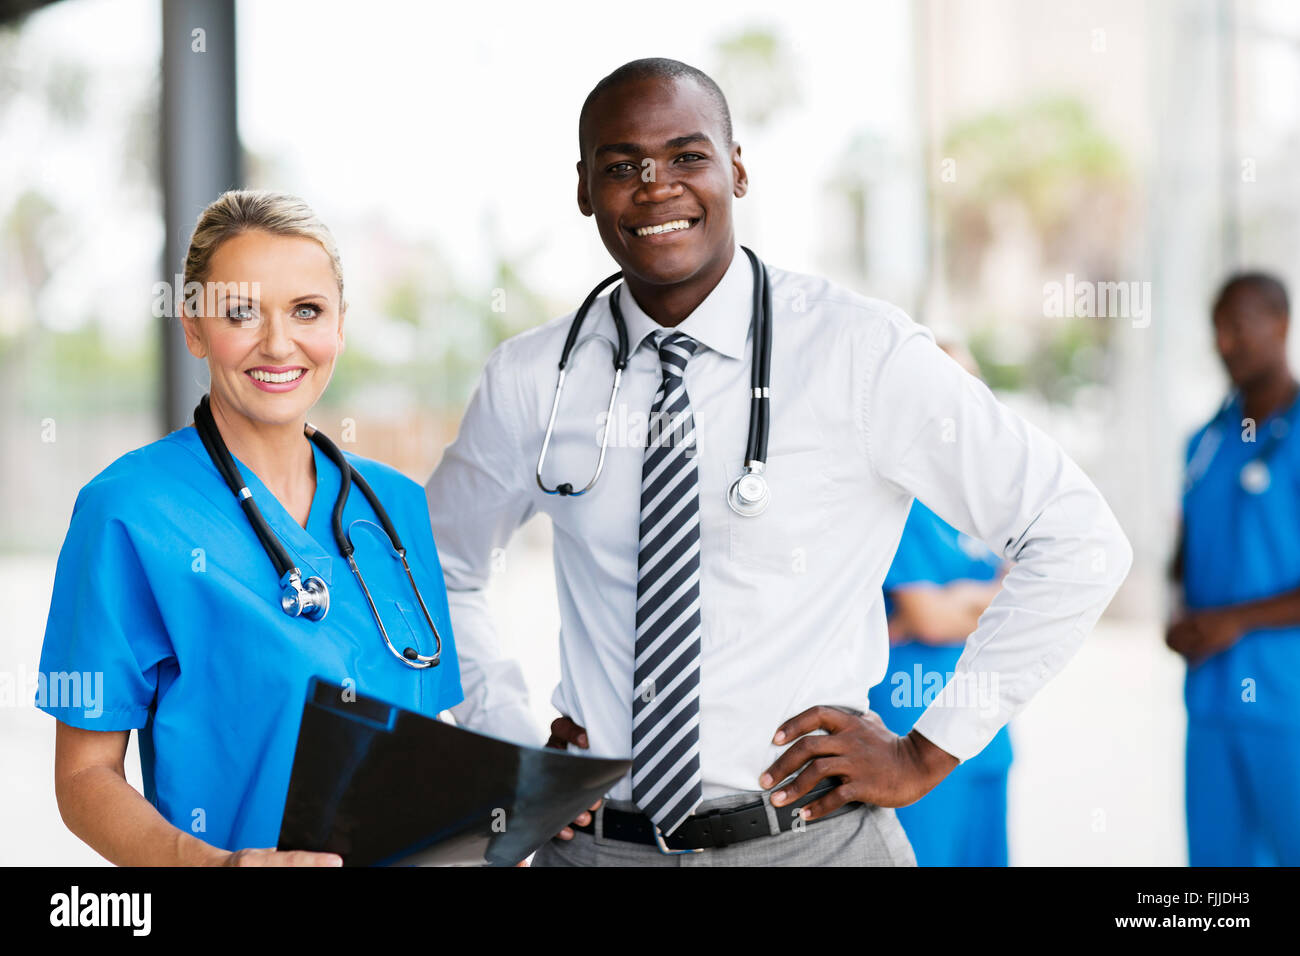 portrait of professional medical workers in hospital Stock Photo